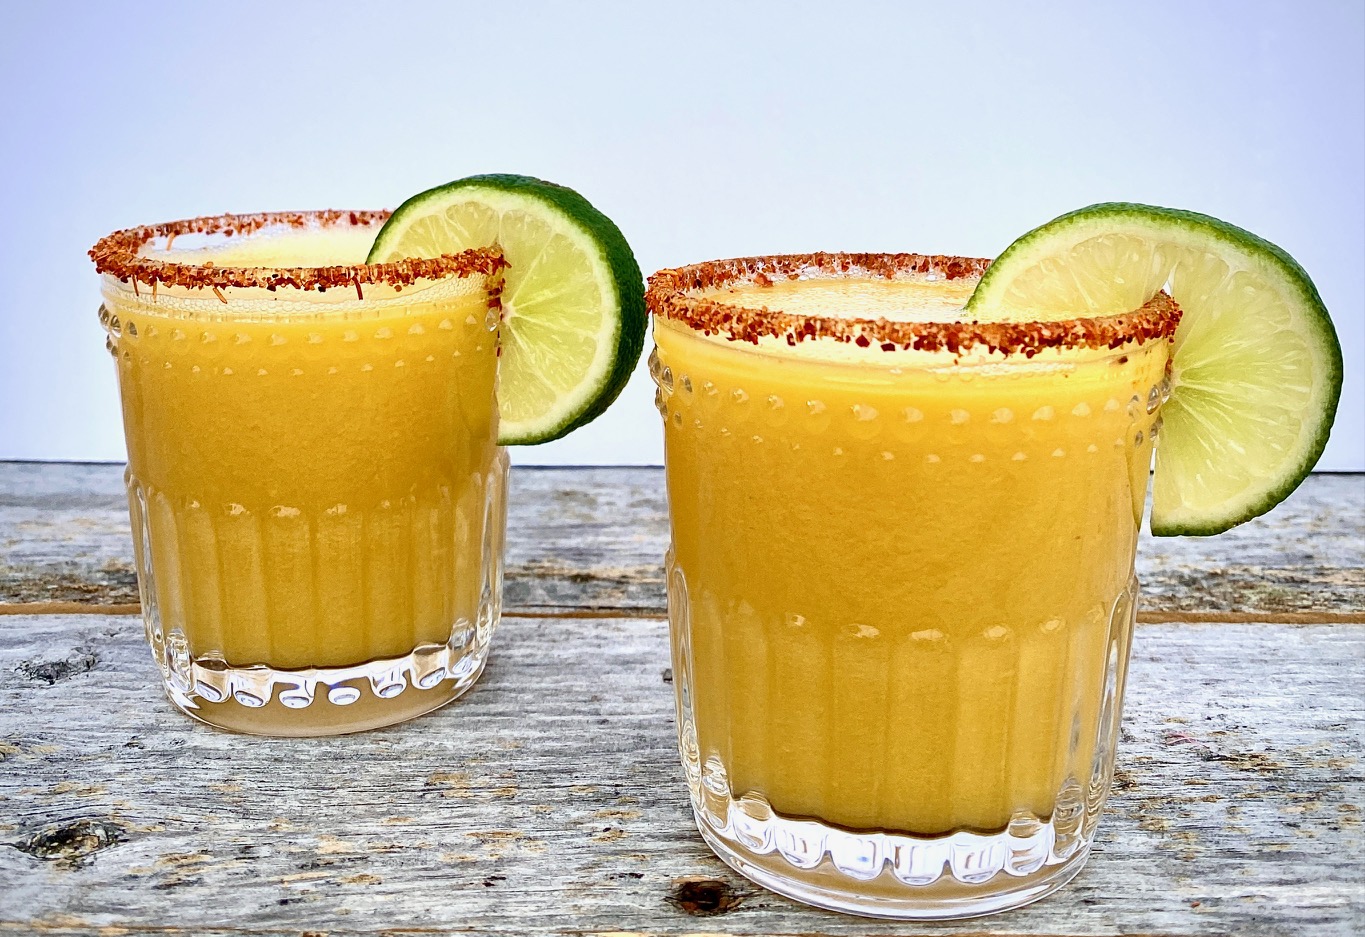 Spicy Mango Margaritas with Chili Lime • The Art of Food and Wine